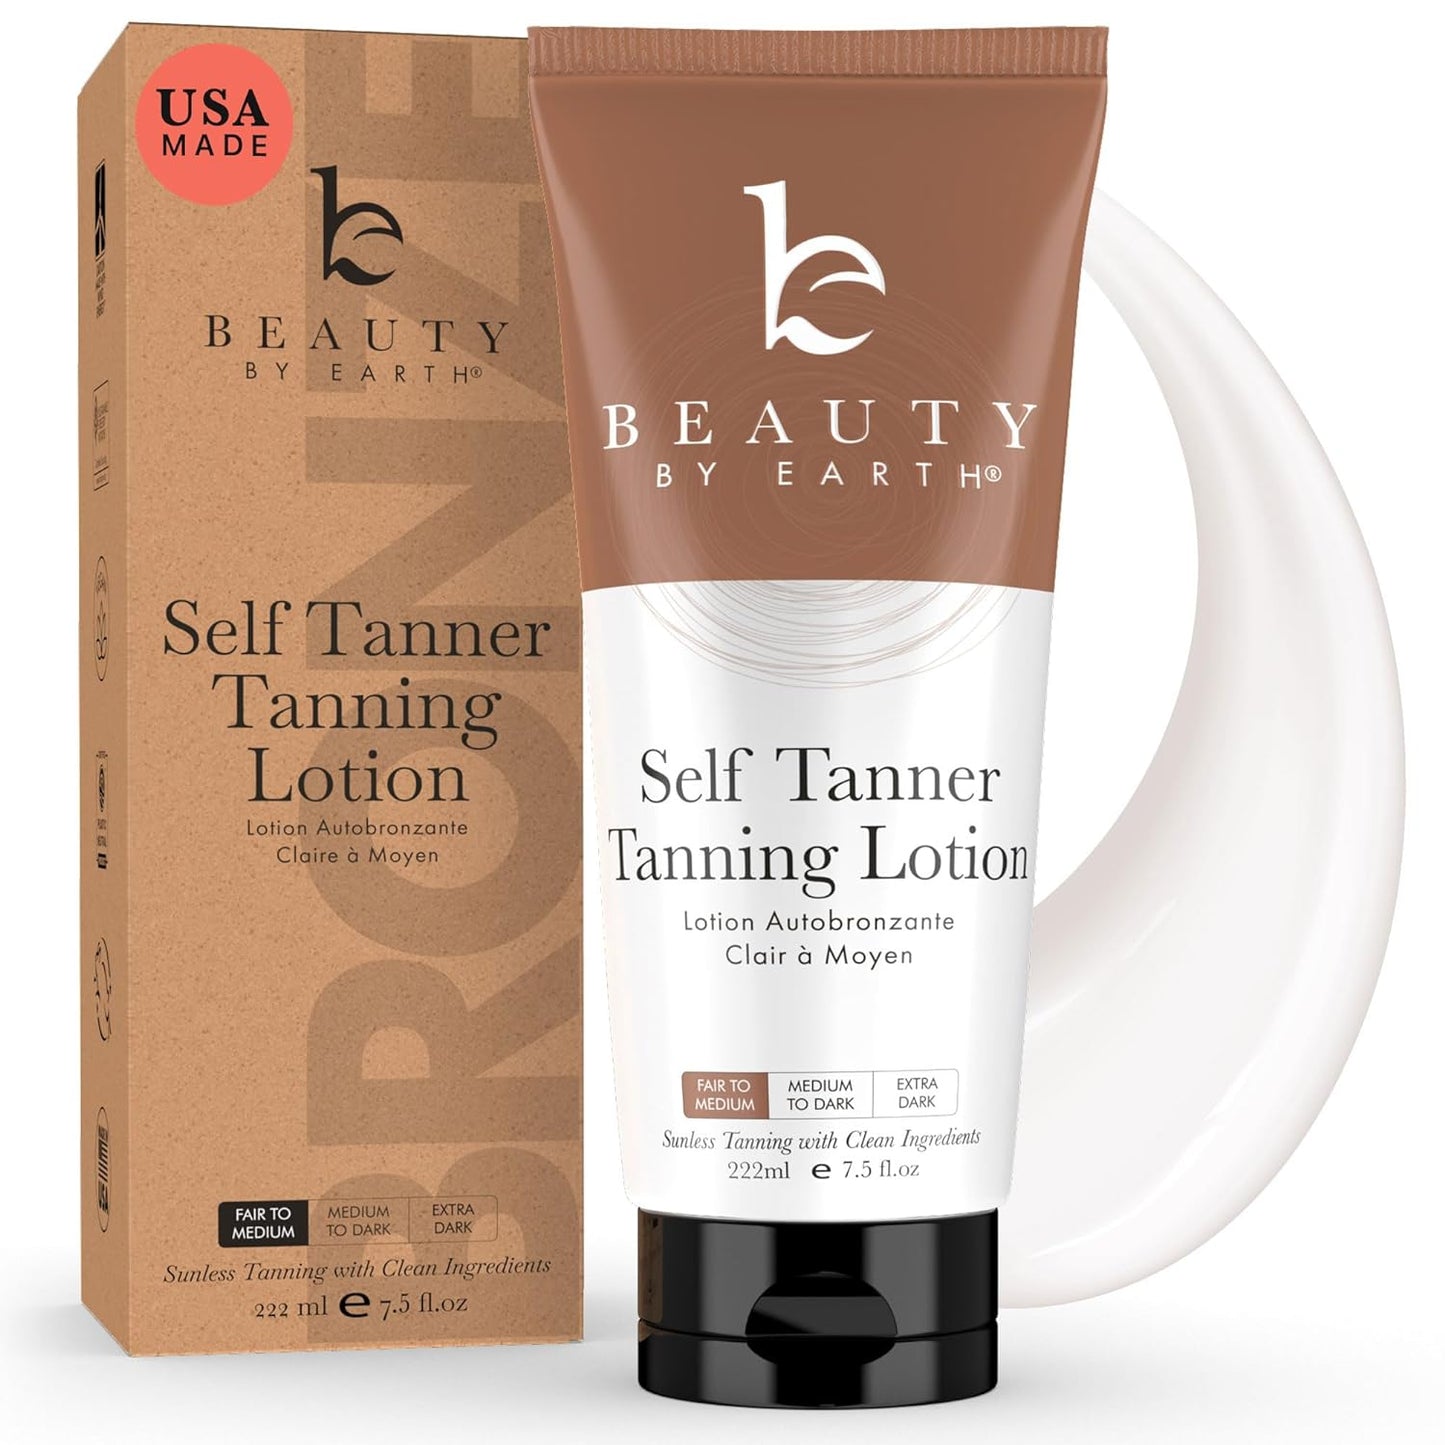 Self Tanner - USA Made with Natural & Organic Ingredients, Moisturizing Self Tanning Lotion with Aloe Vera & Coconut for a Natural Glow, Streak-Free Fake Tan, Medium to Dark